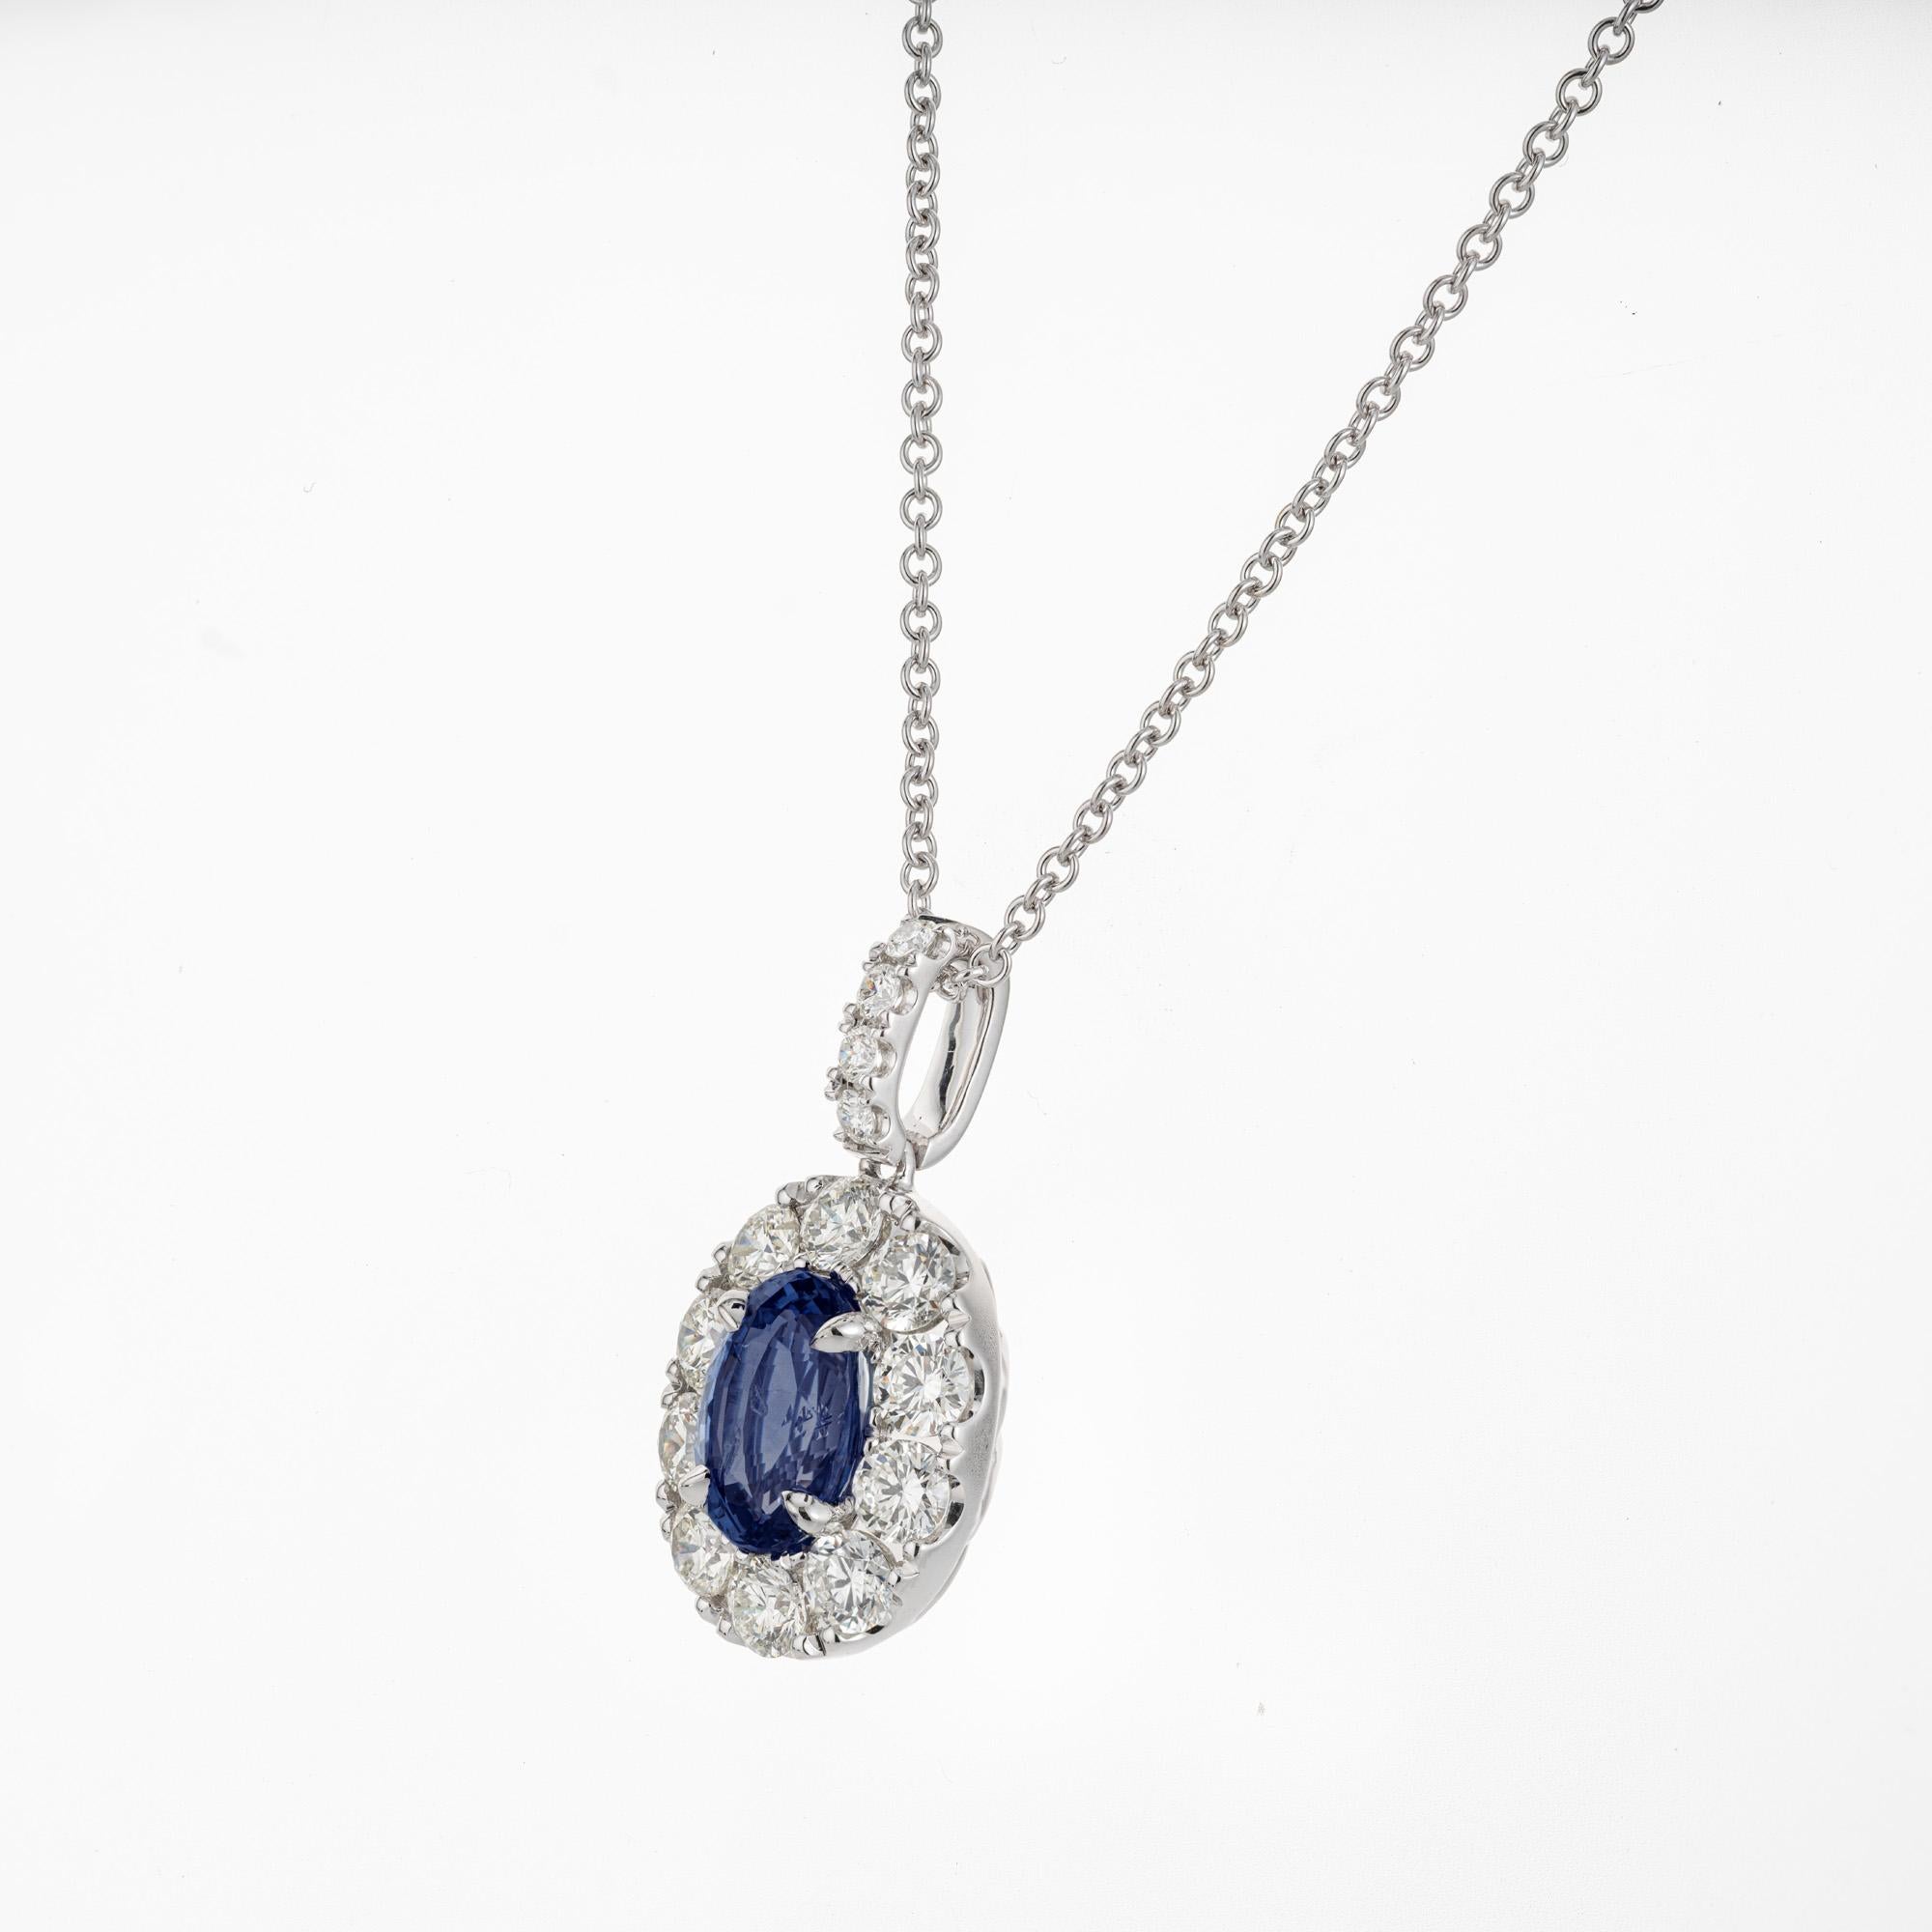 Oval Cut Peter Suchy GIA Certified 3.04 Carat Sapphire Diamond Gold Pendant Necklace For Sale